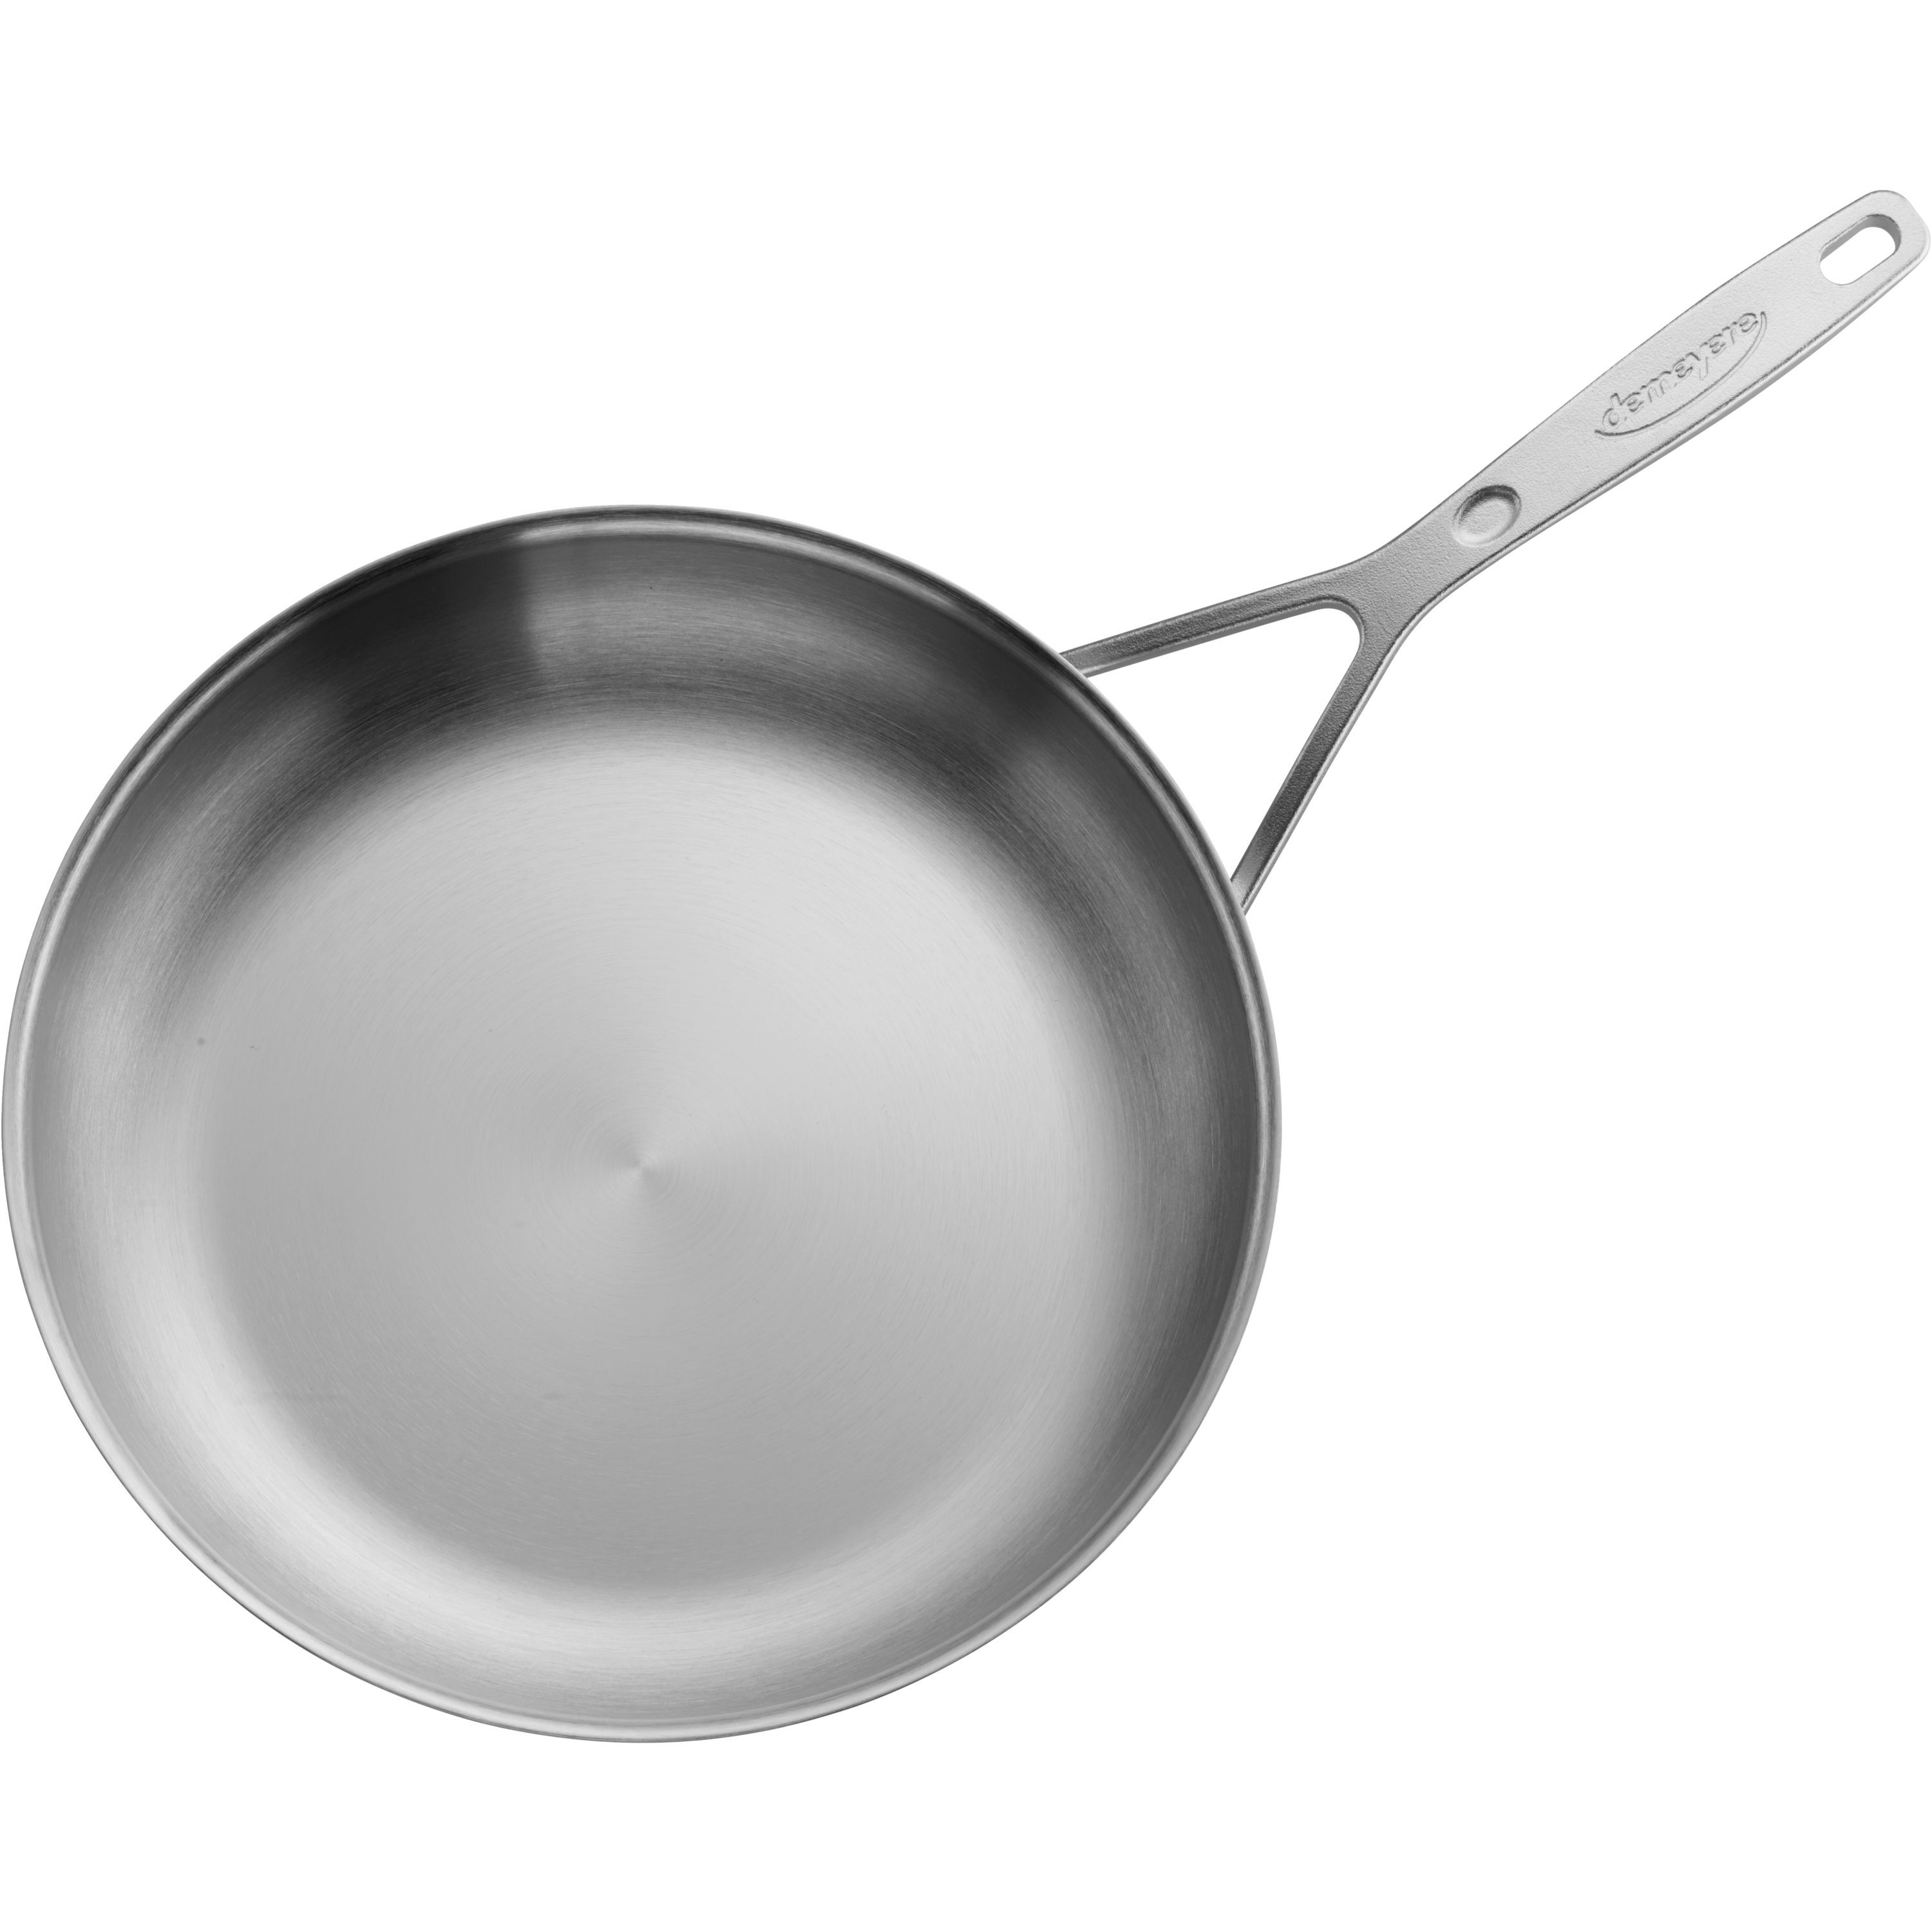 5-Ply 11-inch Stainless Steel Fry Pan 